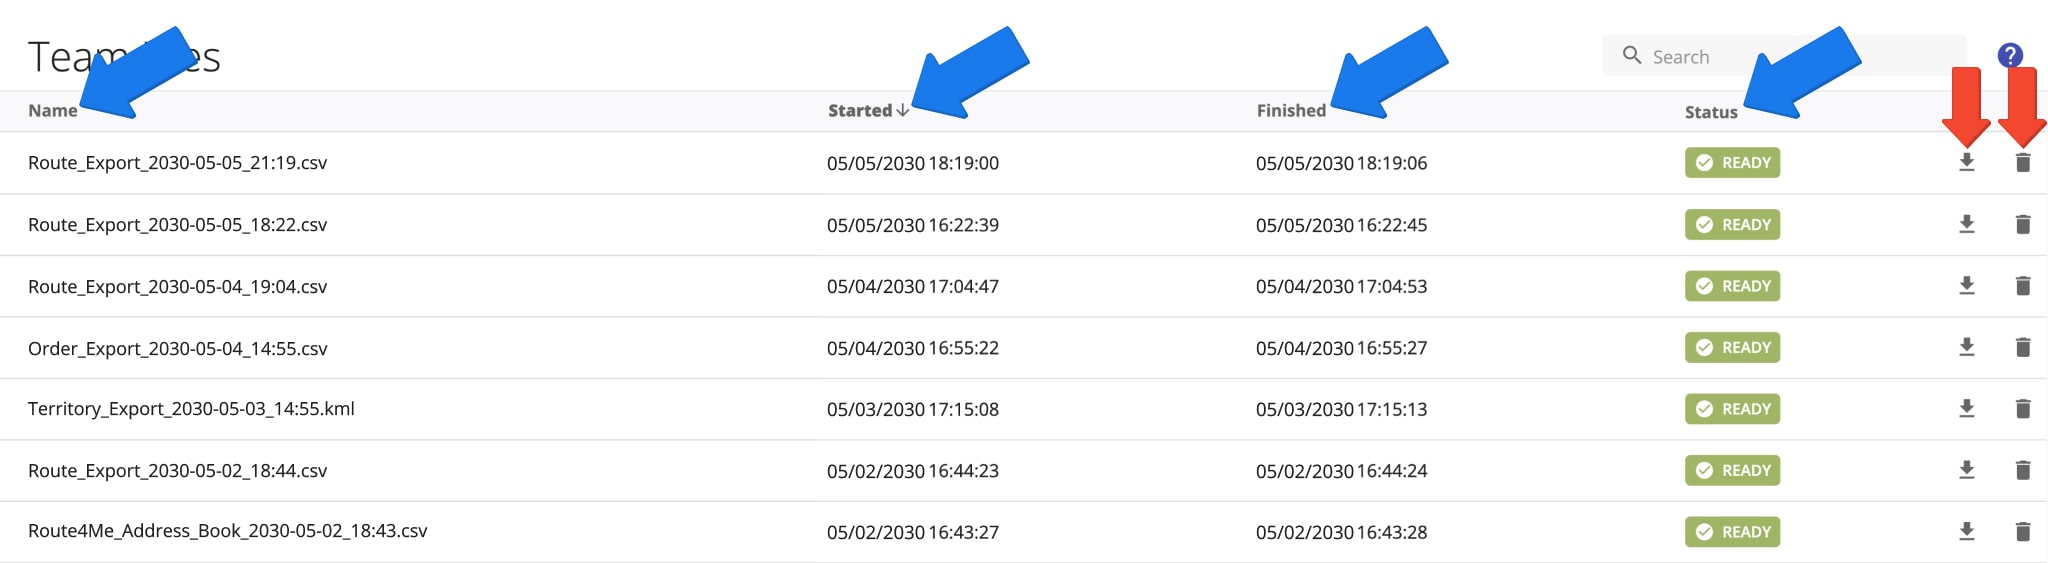 You can use the header to sort and manage your Team Files. Simply click the preferred column name to sort files in either ascending or descending order according to the preferred column.